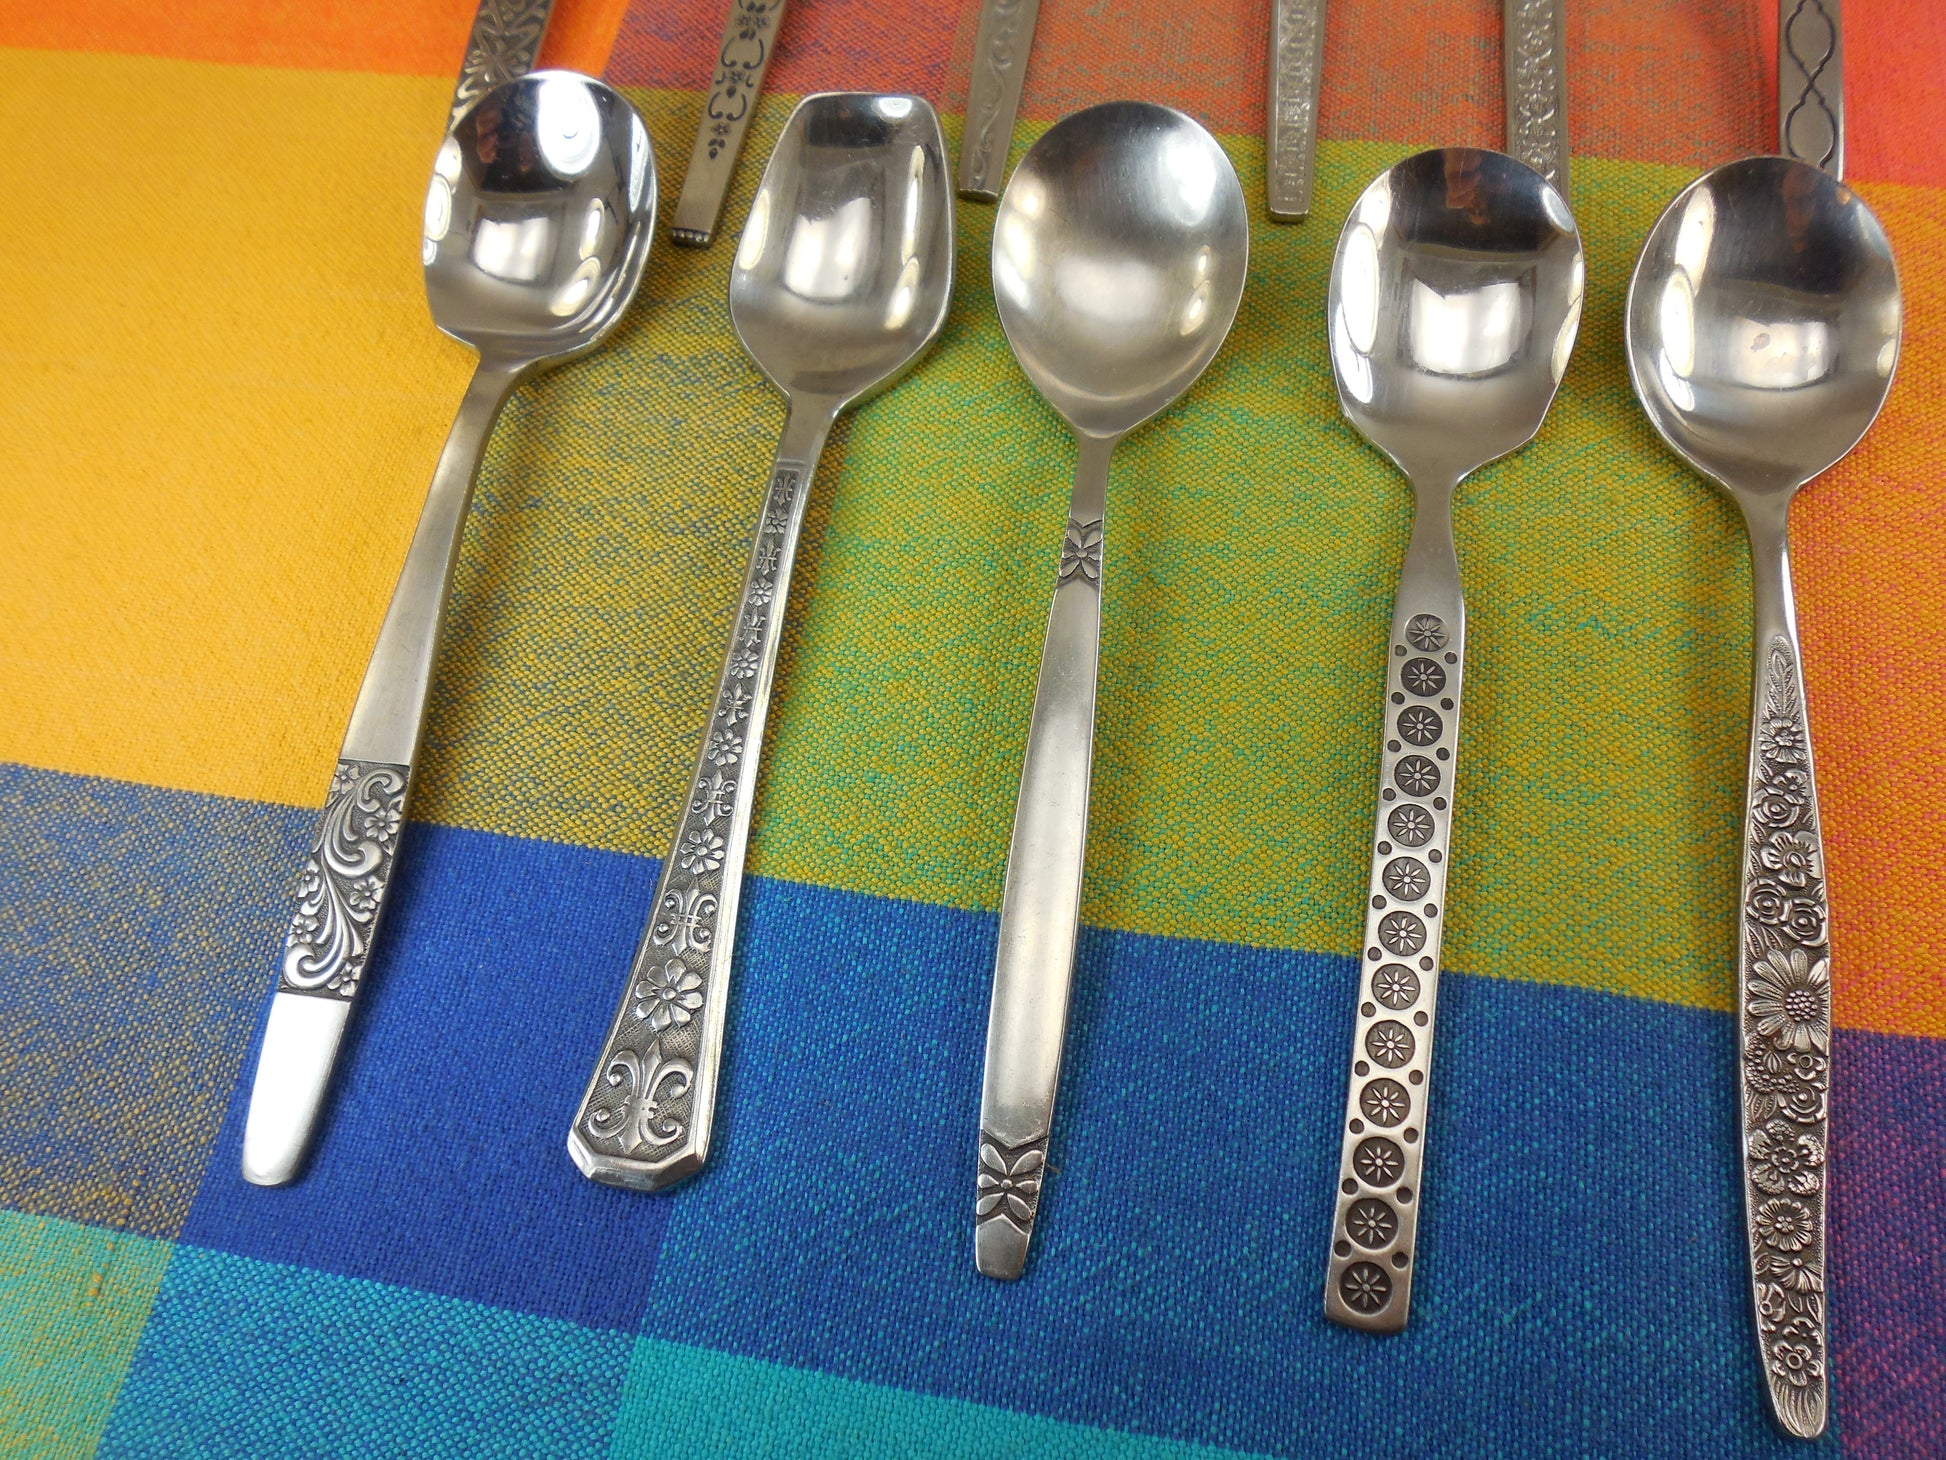 Mismatched Flatware Black Highlight Modern Stainless - 11 Sugar Nut Spoons - Mixed Maker Pattern Handles